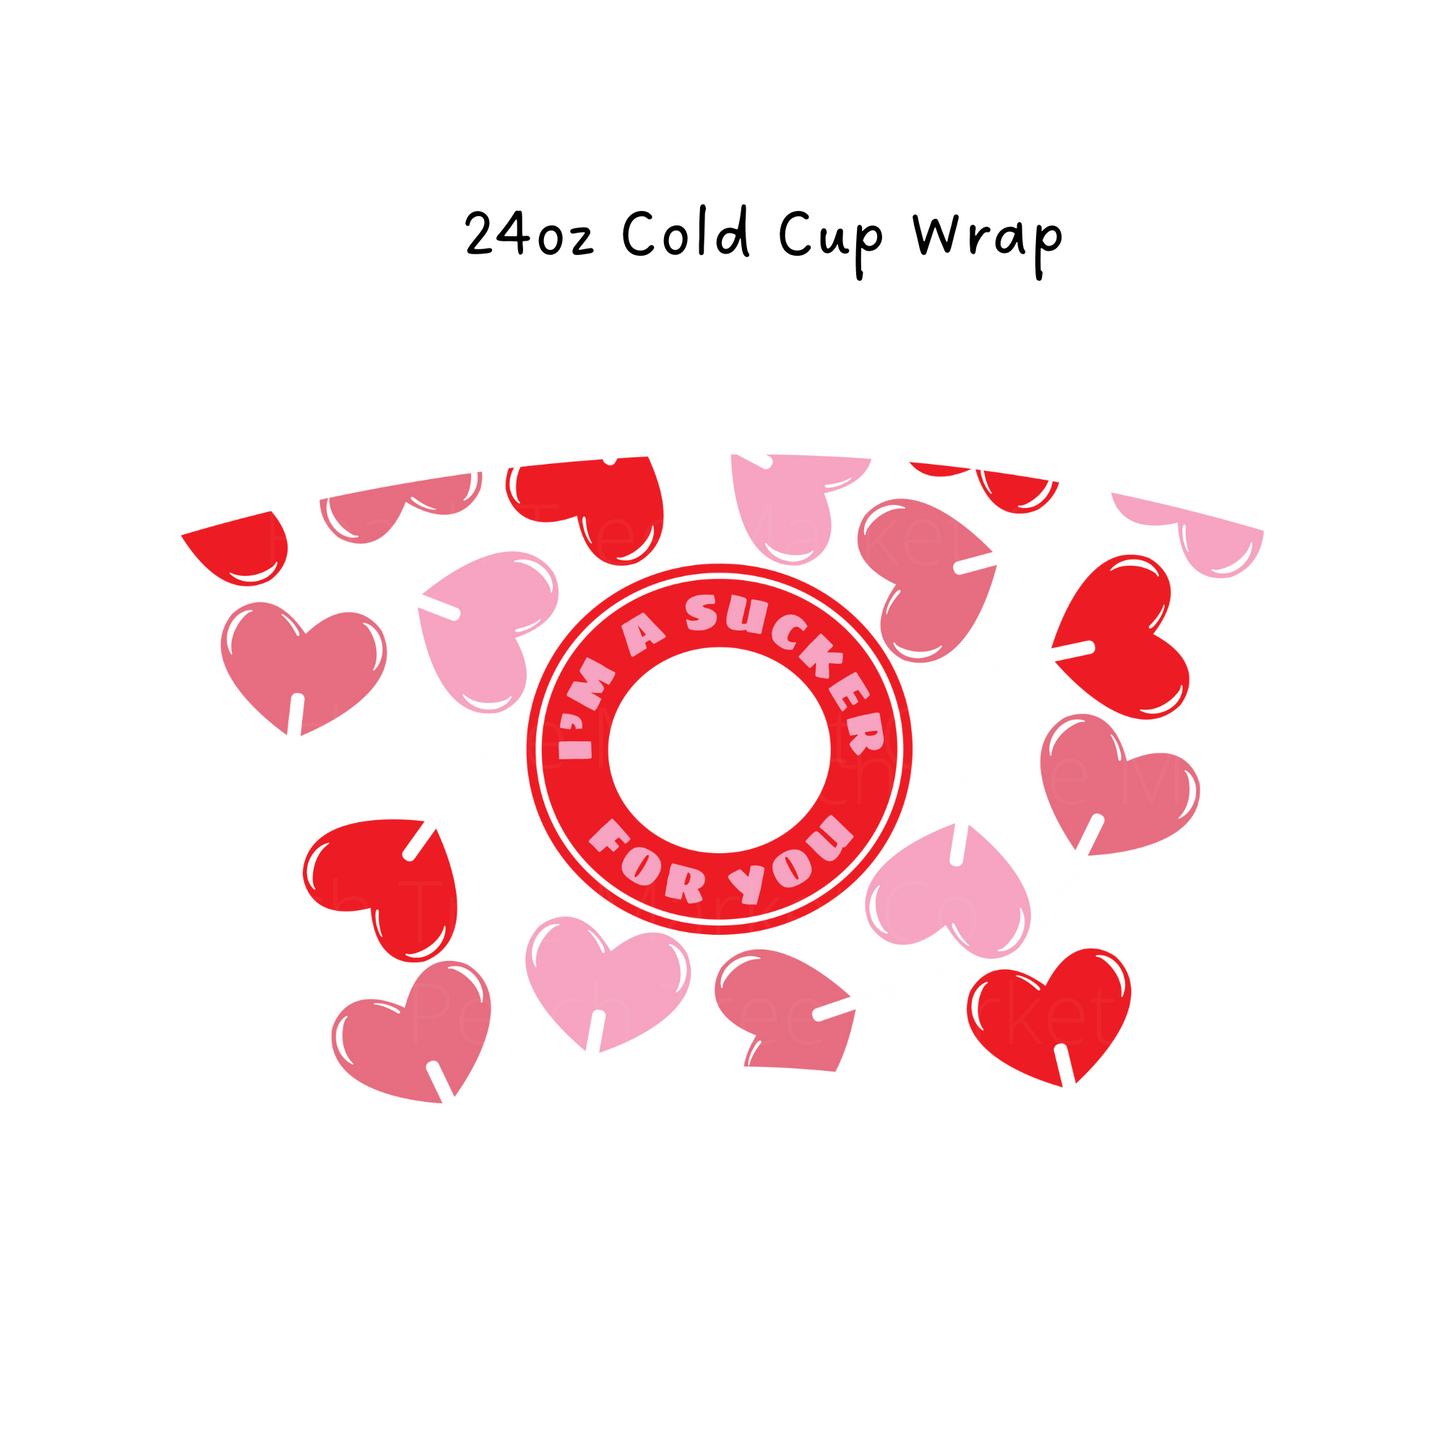 Im a Sucker For You 24 OZ Cold Cup Wrap